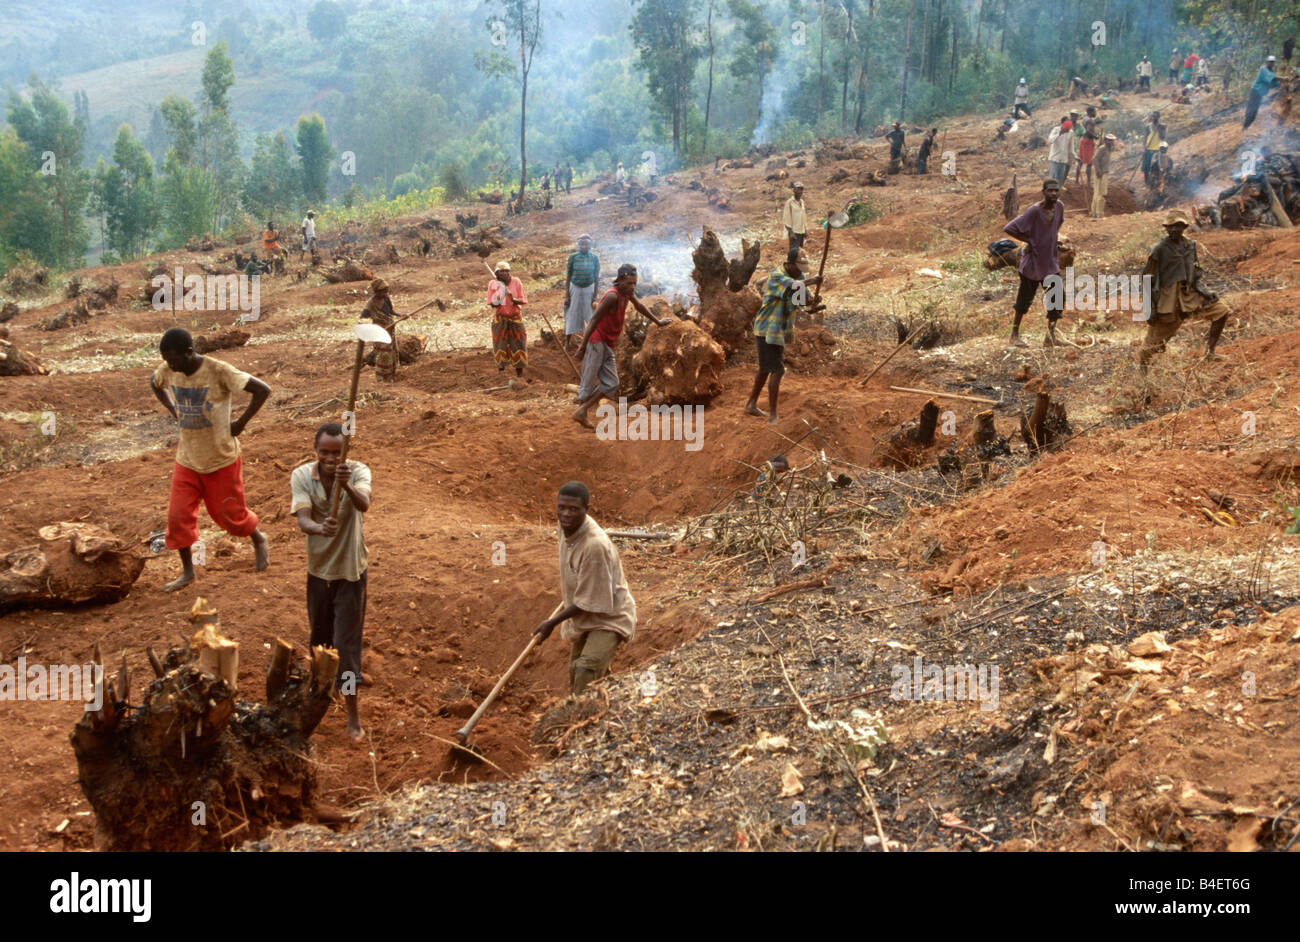 Workers preparing land for agriculture, Uganda Stock Photo